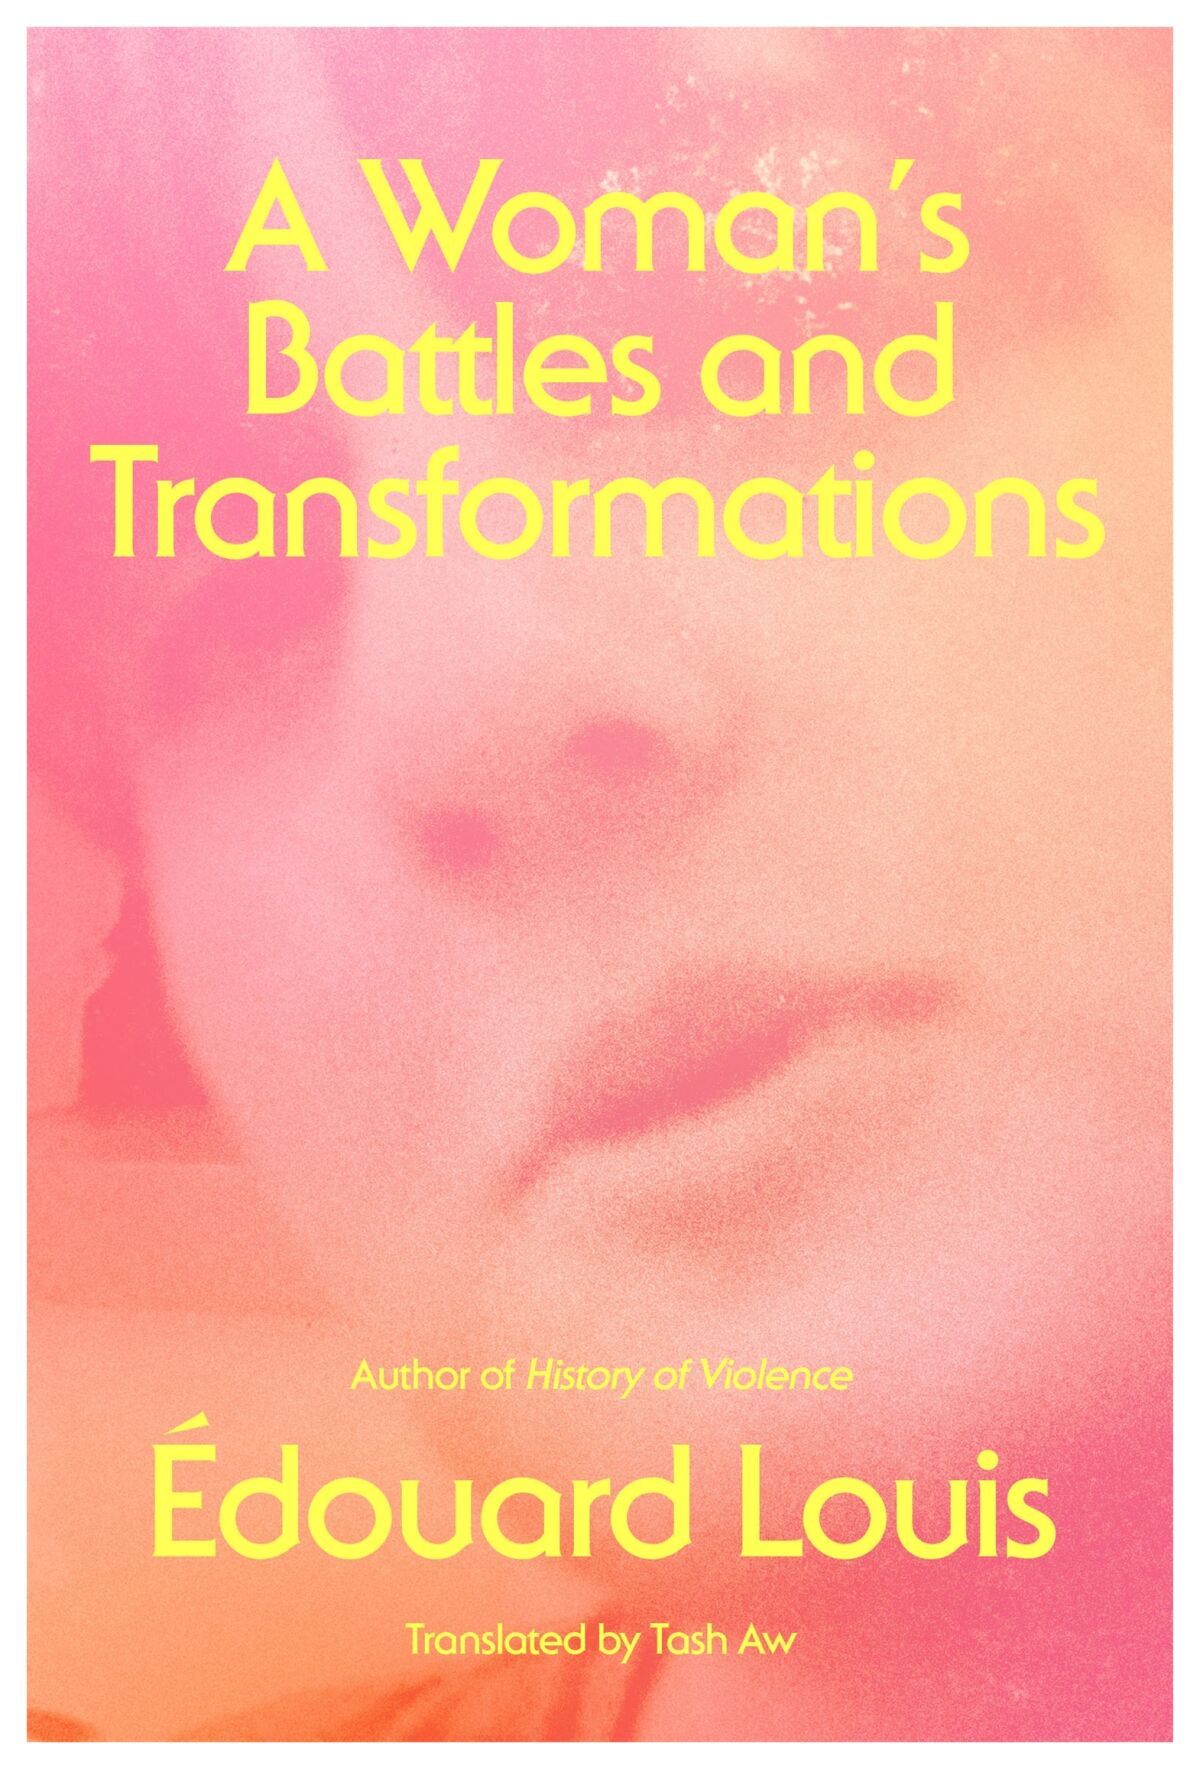 book cover for "A Woman's Battles and Transformations" by Edouard Louis, translated by Tash Aw